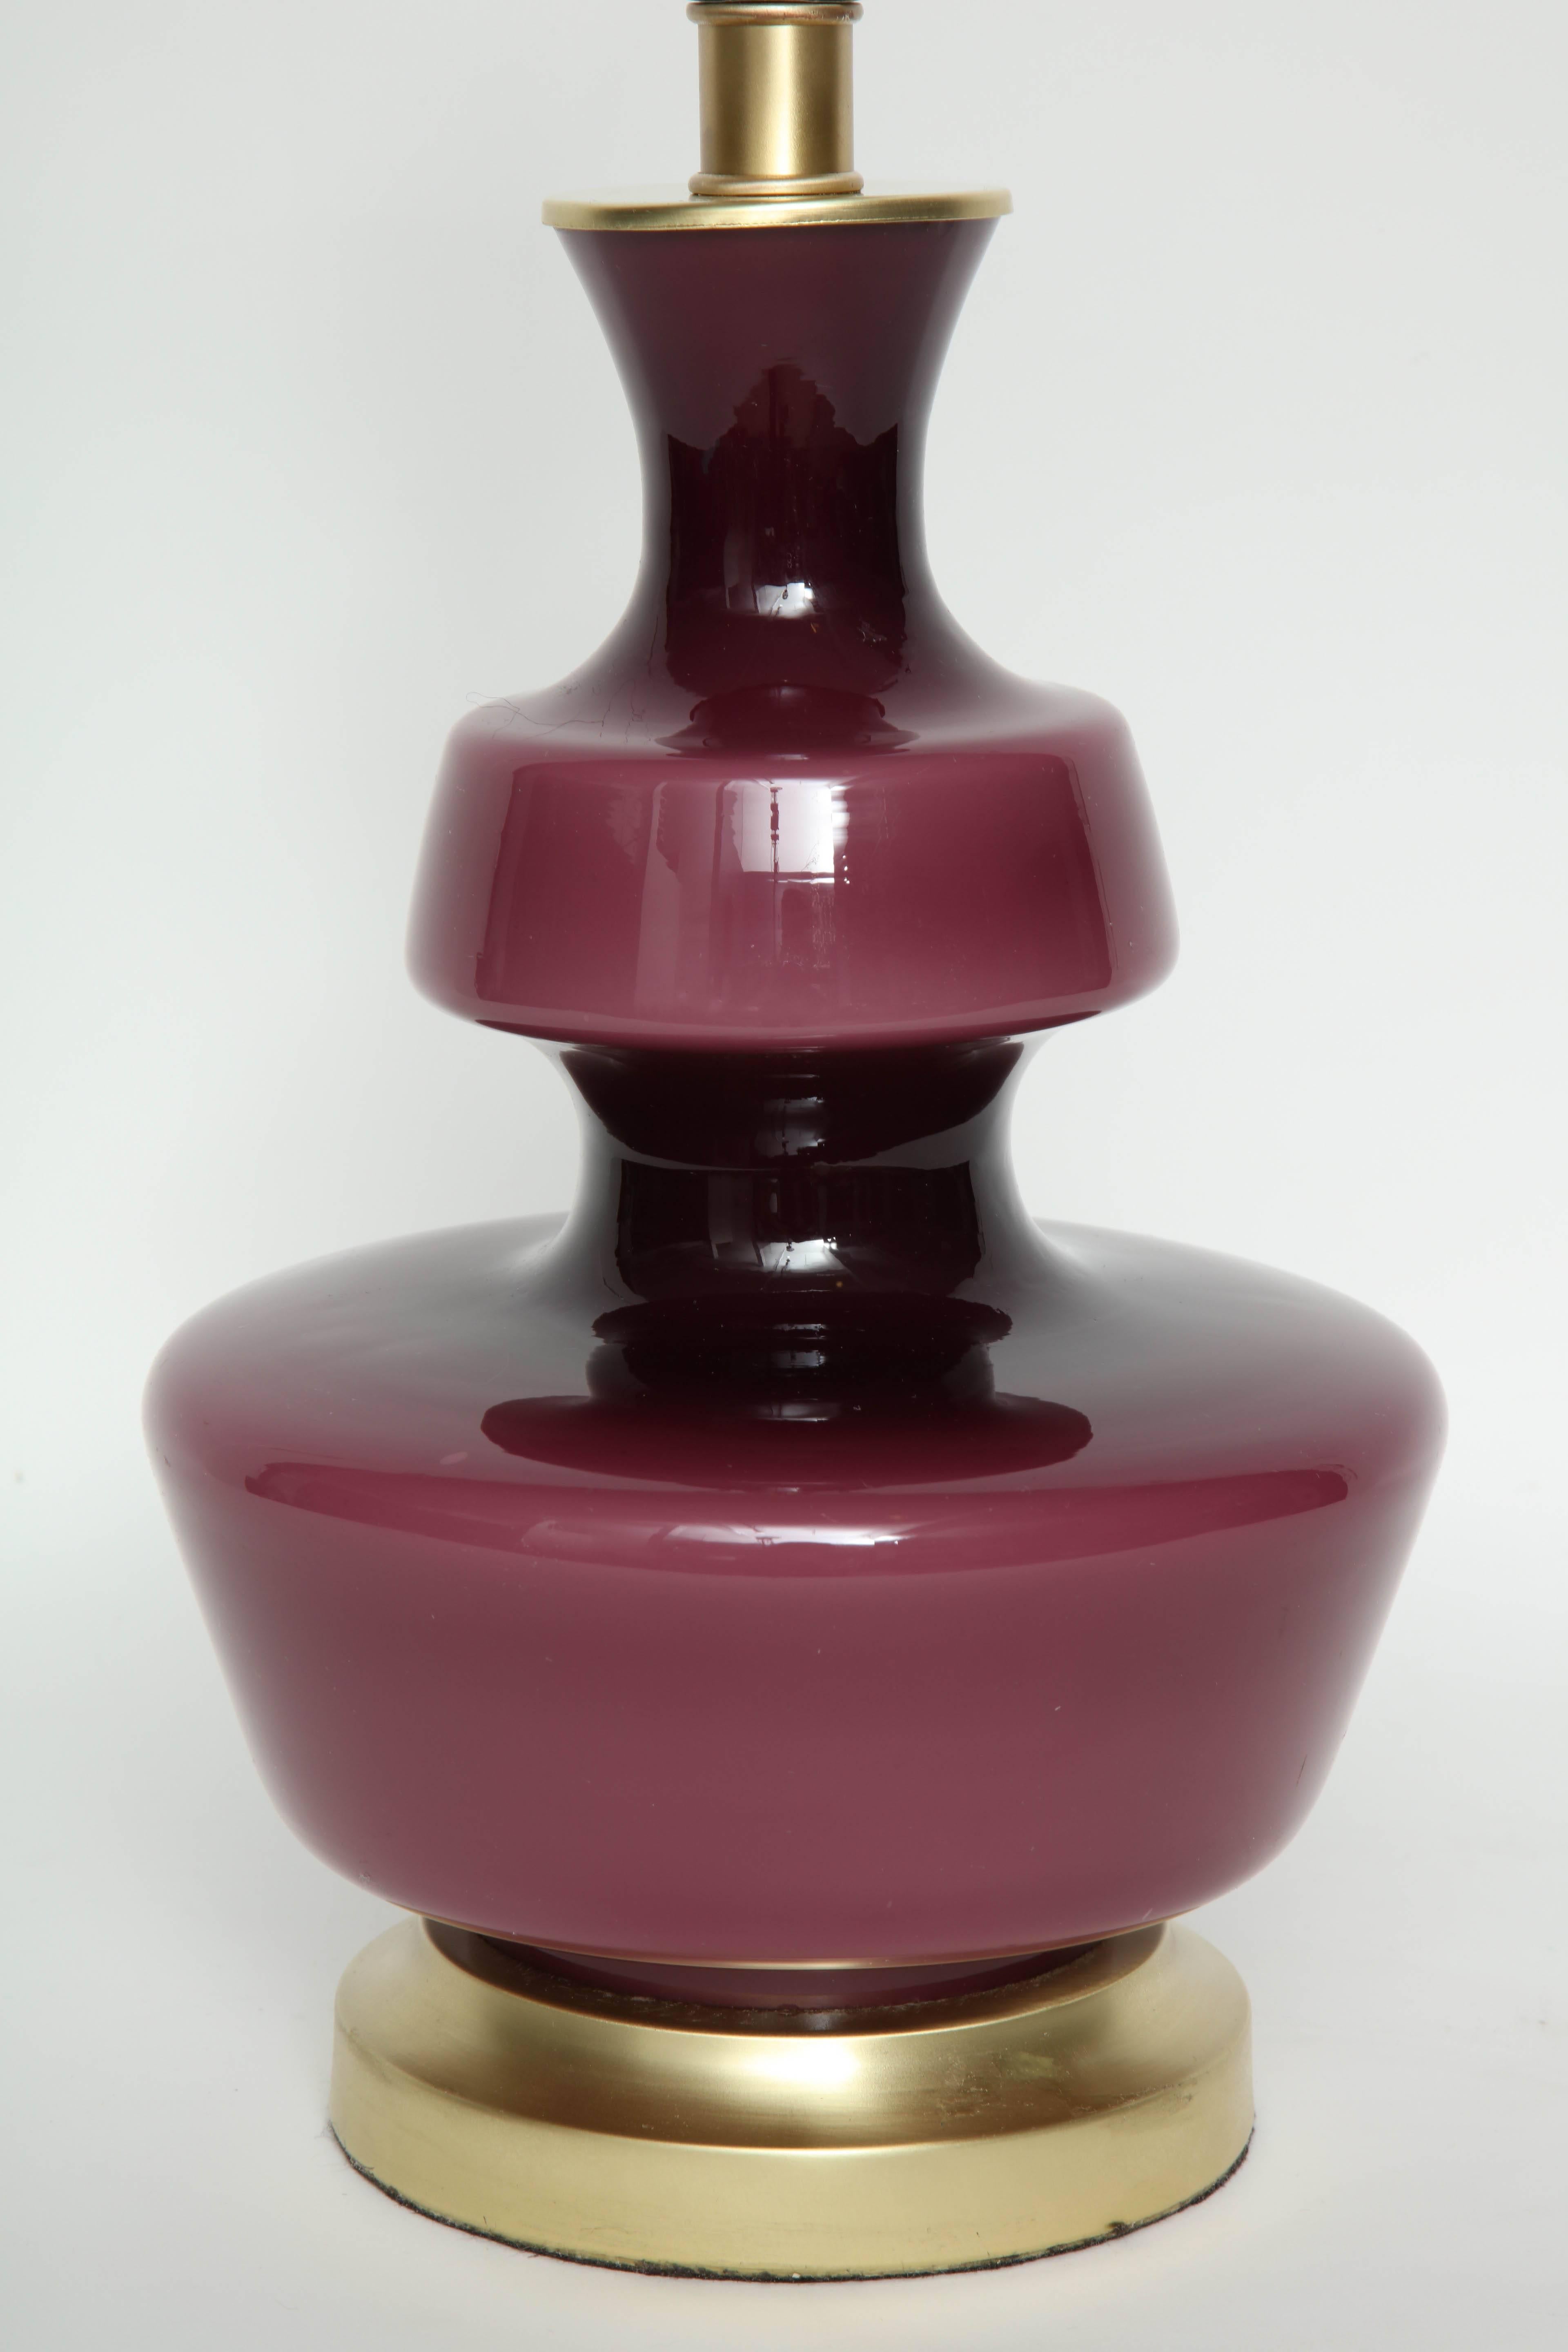 Pair of Scandinavian Modern pawn shaped raspberry colored glass lamps on satin brass bases by Holmegaard of Sweden. Rewired for use in the USA.

Glass portion measures 12.25